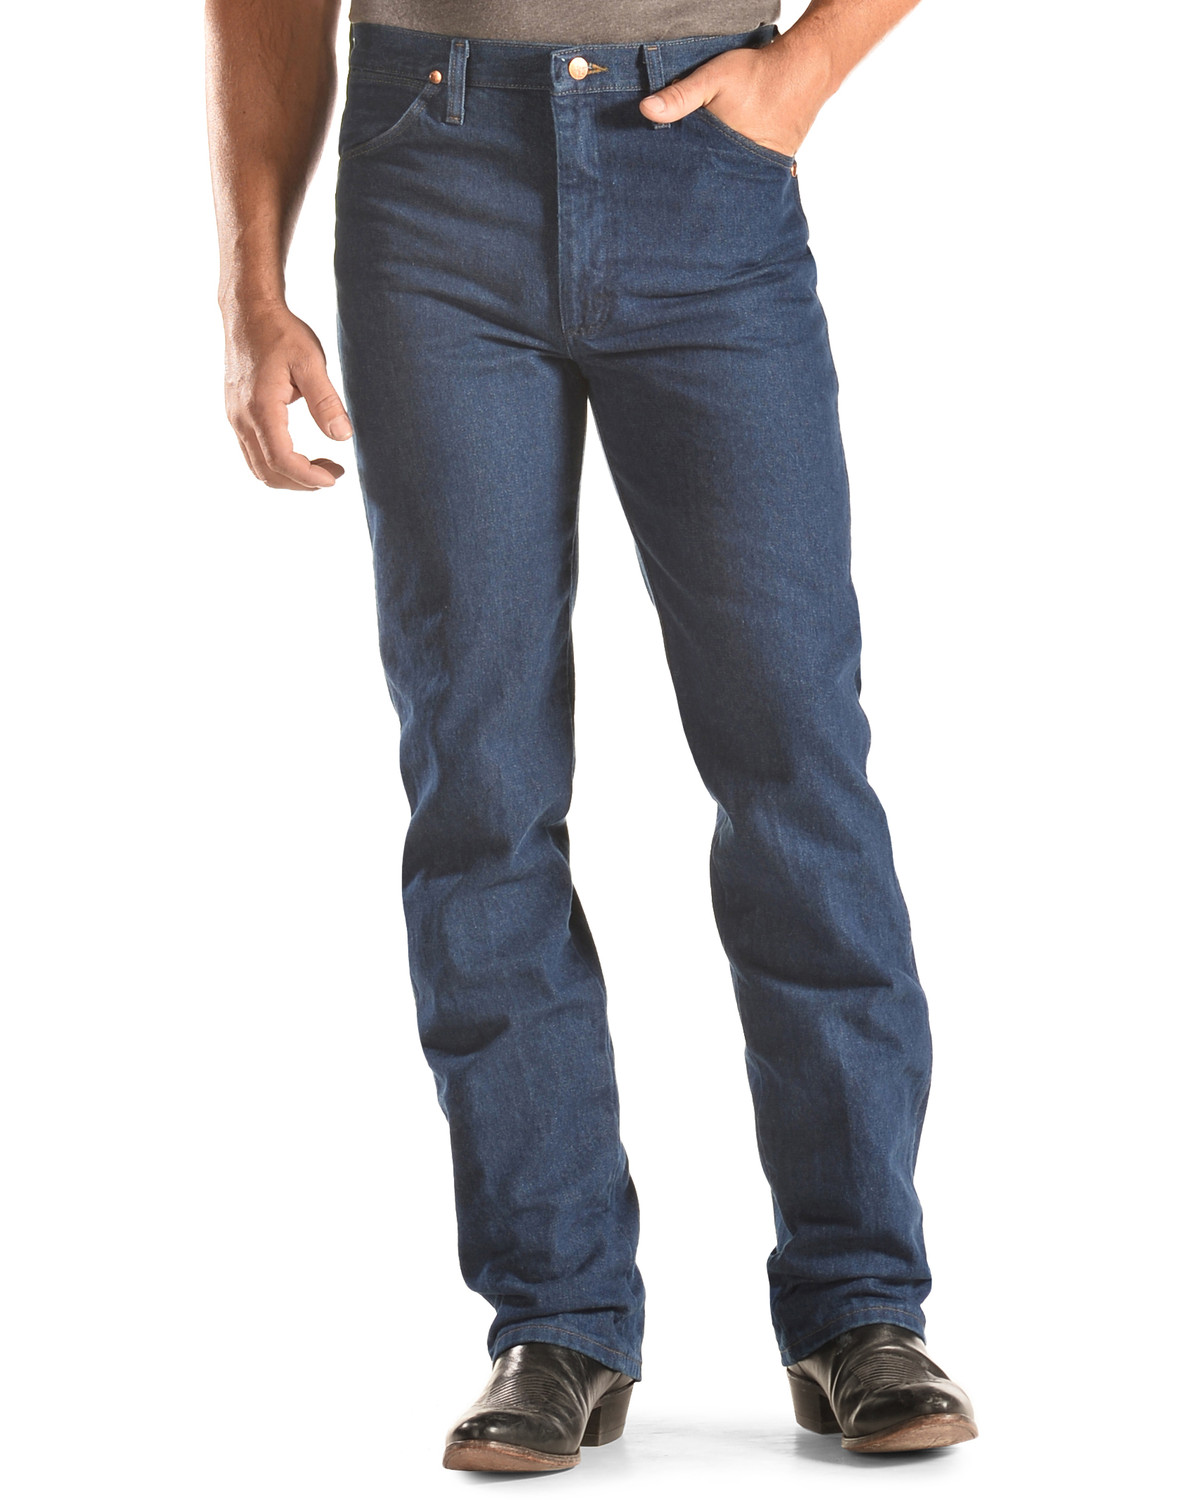 Wrangler 936 Cowboy Cut Slim Fit Prewashed Jeans - Country Outfitter